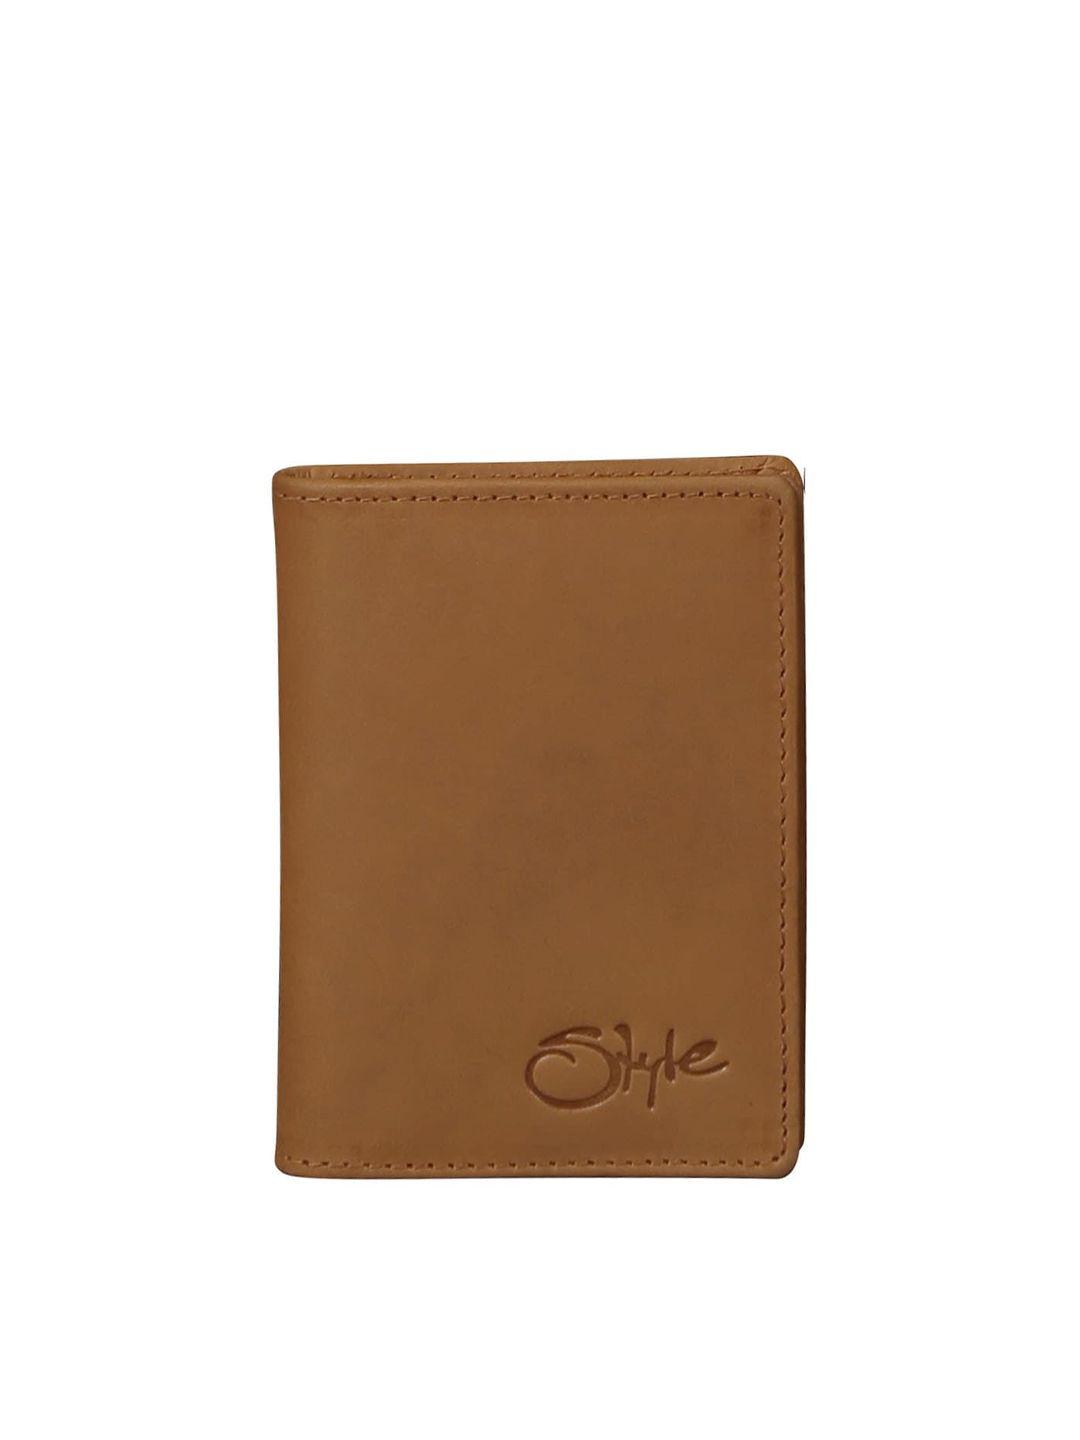 style shoes leather card holder